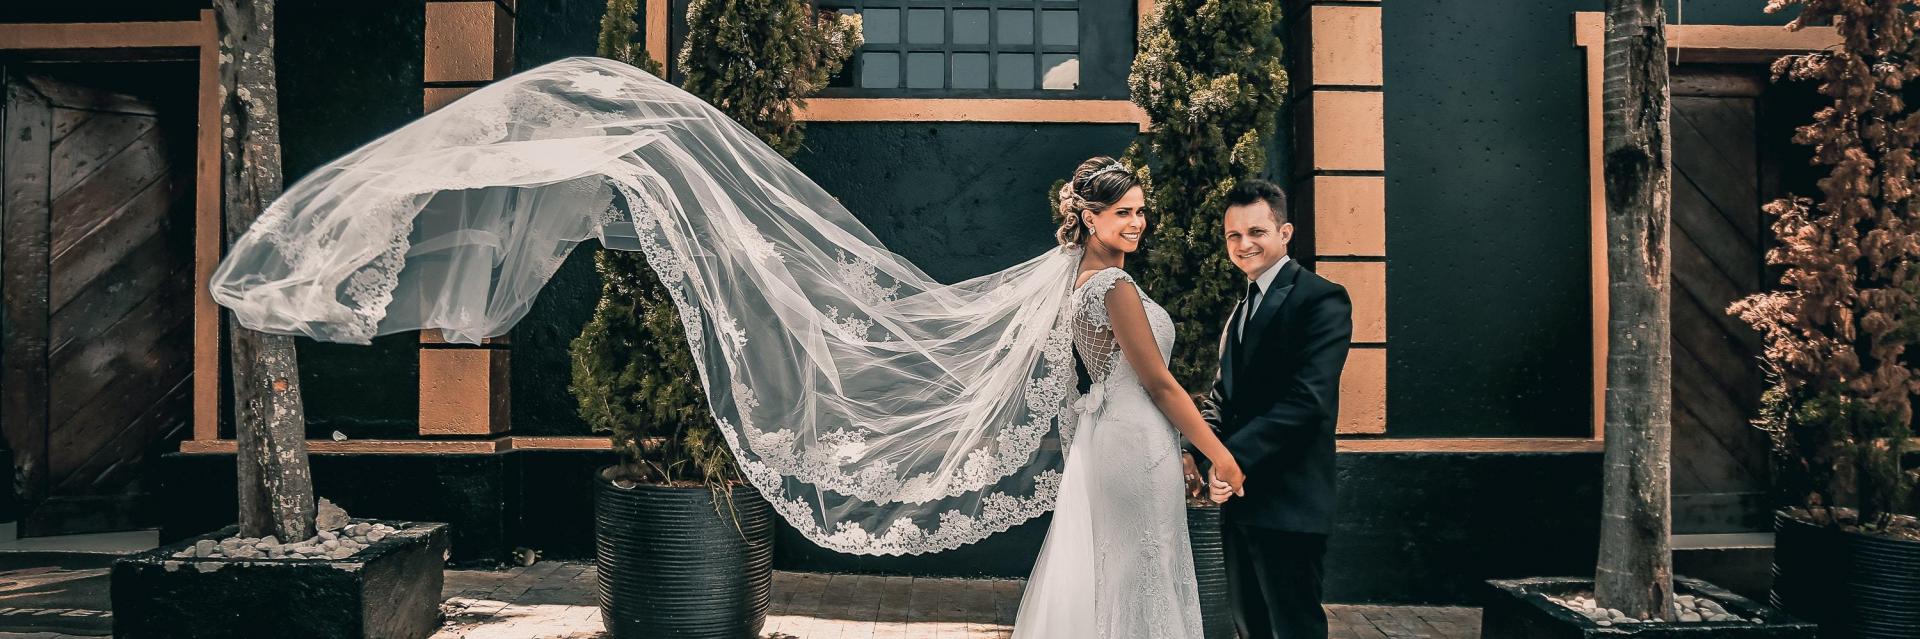 groom and bride in long flowing lace veil